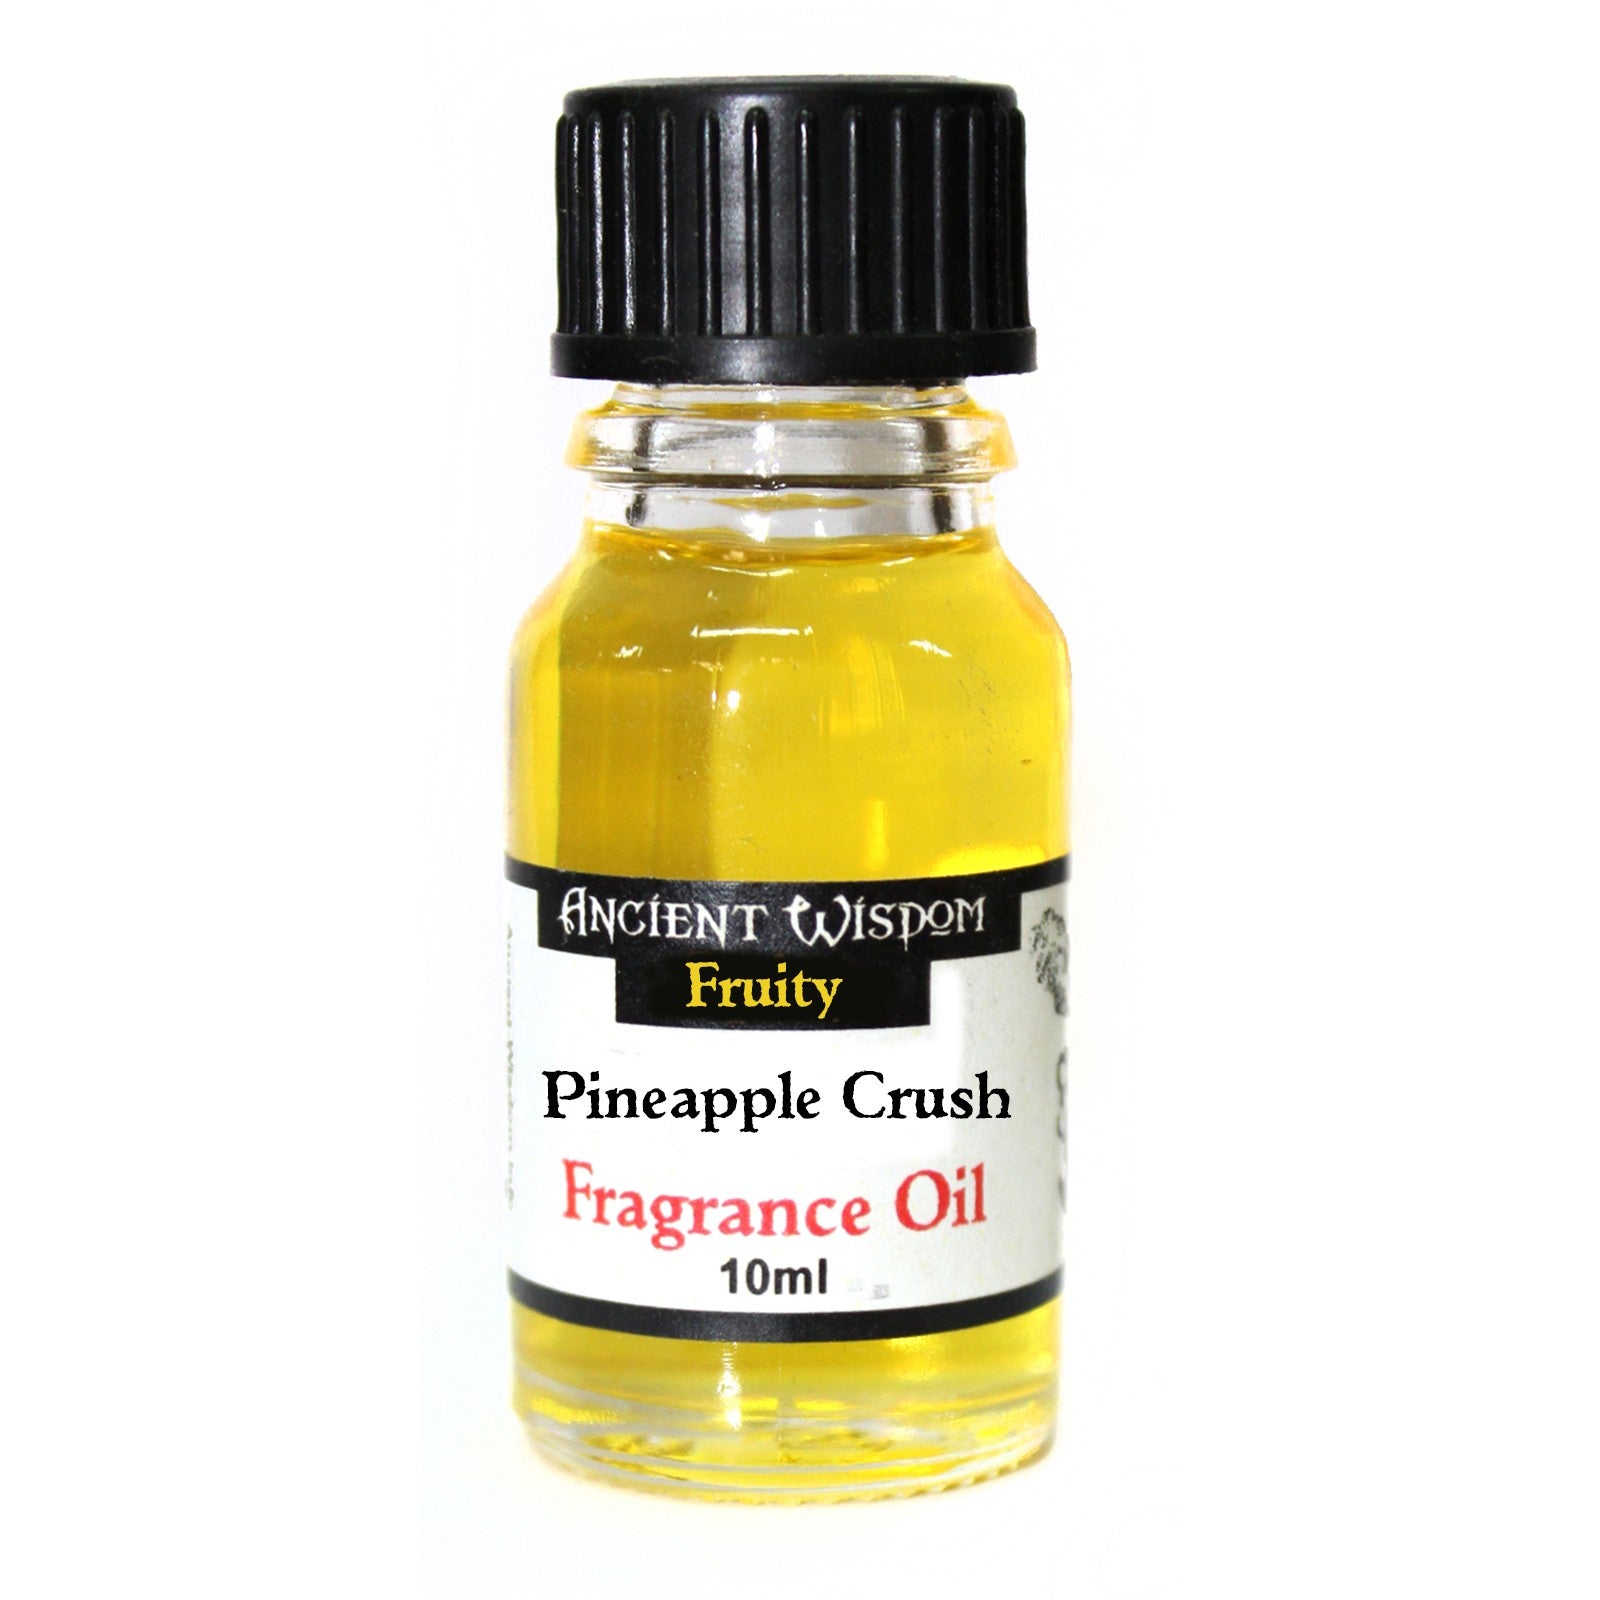 View 10ml Pinapple Crush Fragrance Oil information